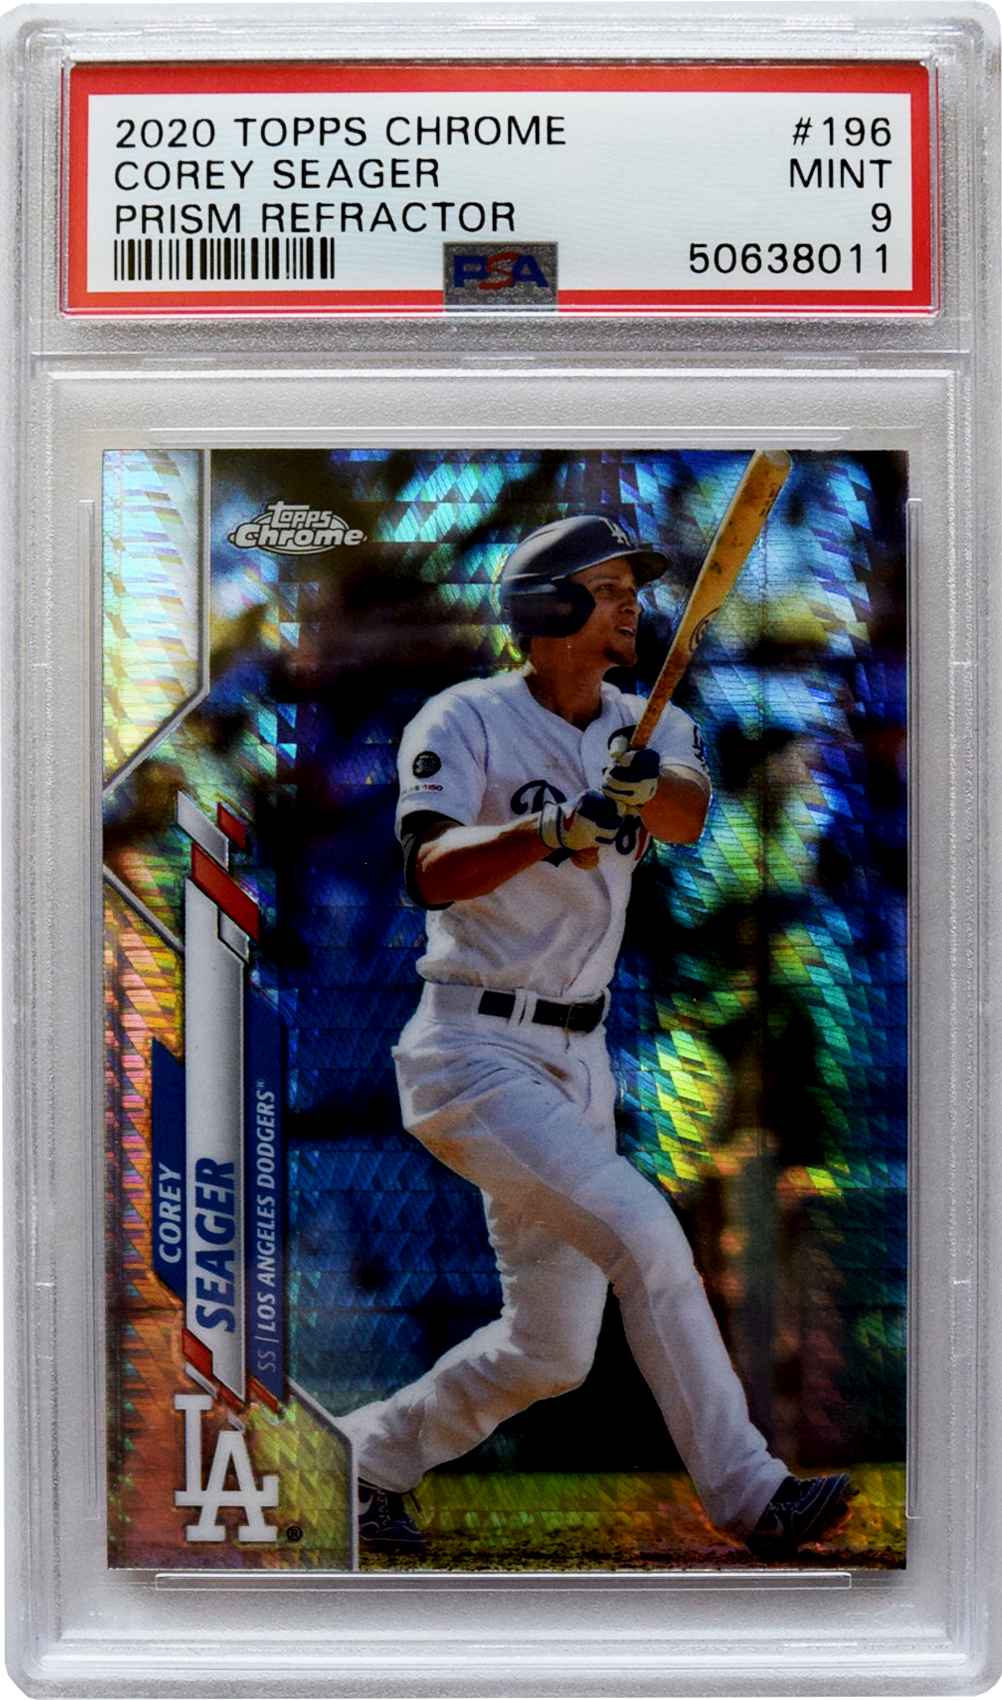 2020 Topps - Chrome - #196 Corey Seager Prism Refractor PSA 9 MINT